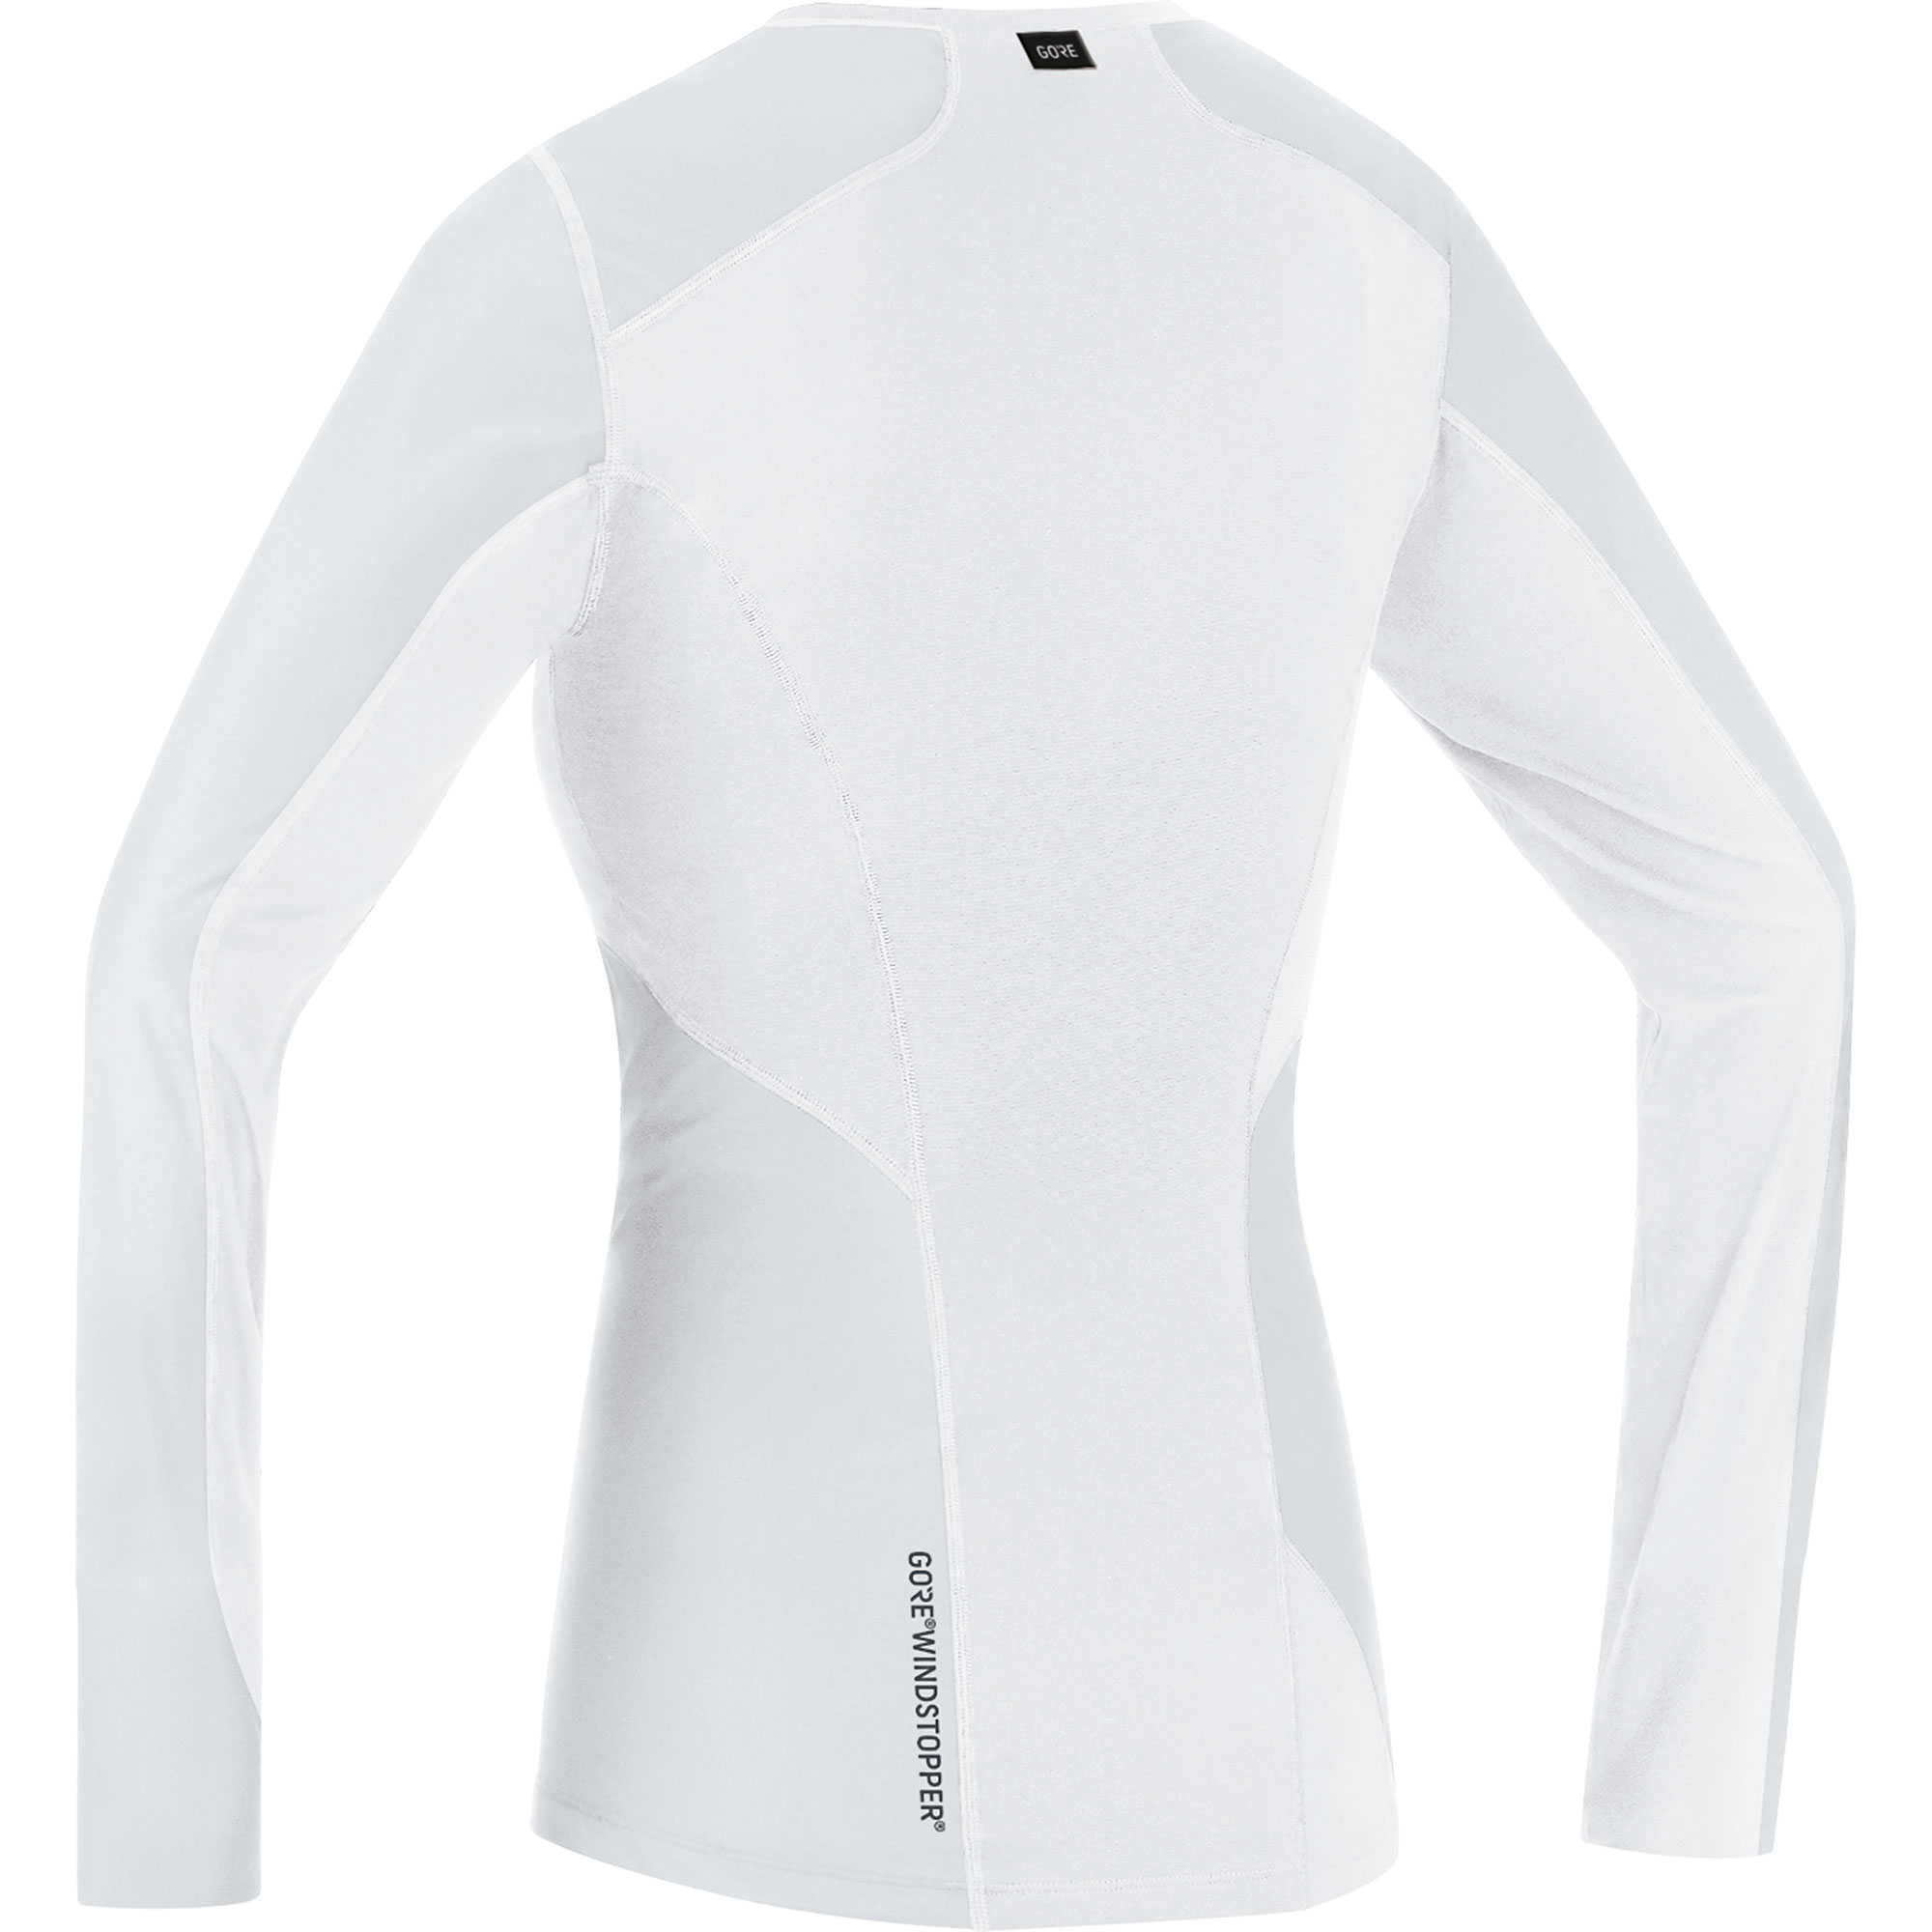 M Femme GORE® WINDSTOPPER® Base Layer Thermo Maillot à manches longues